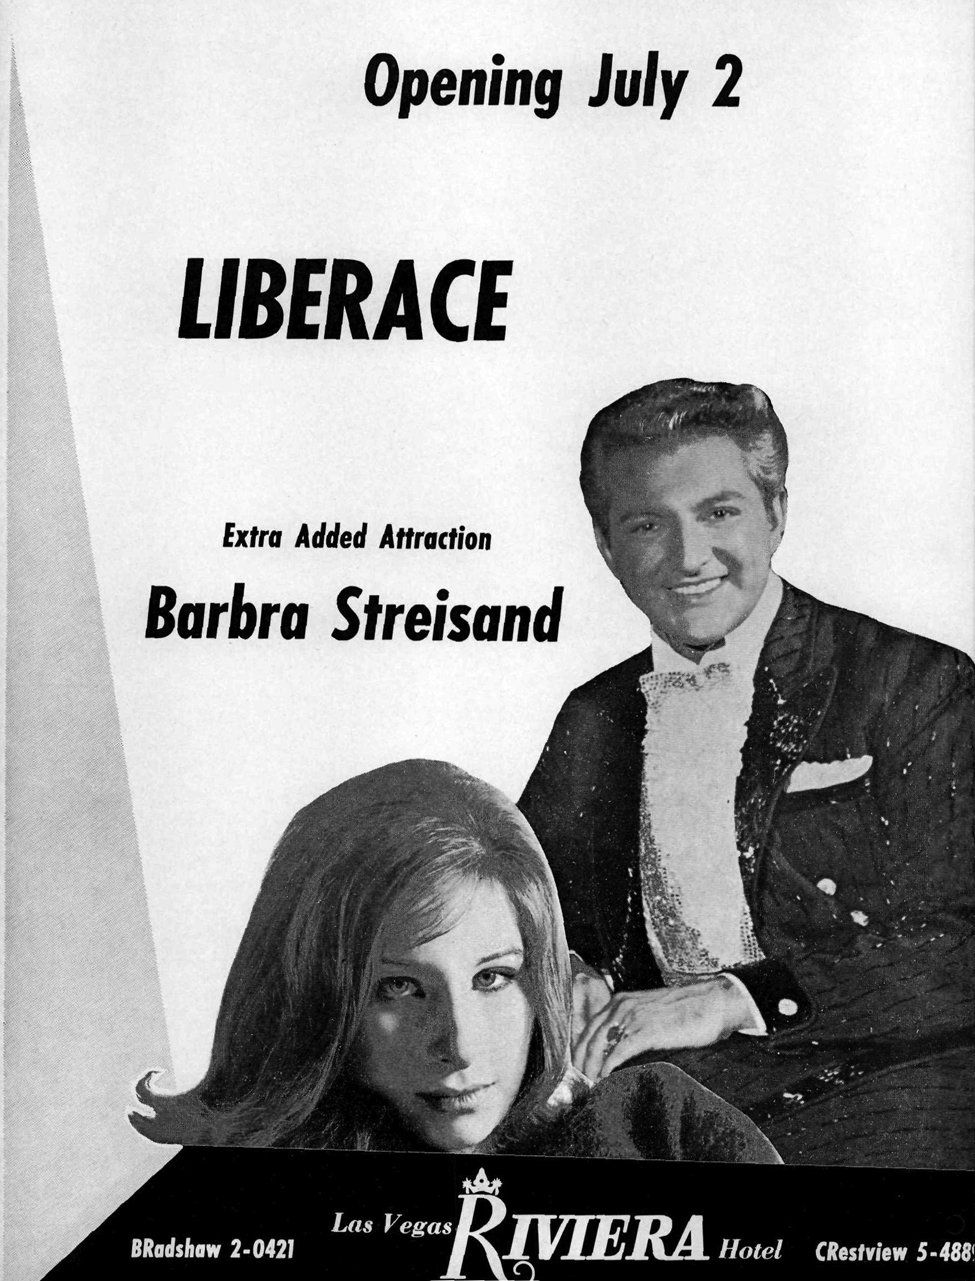 Riviera Hotel ad featuring Liberace and Streisand